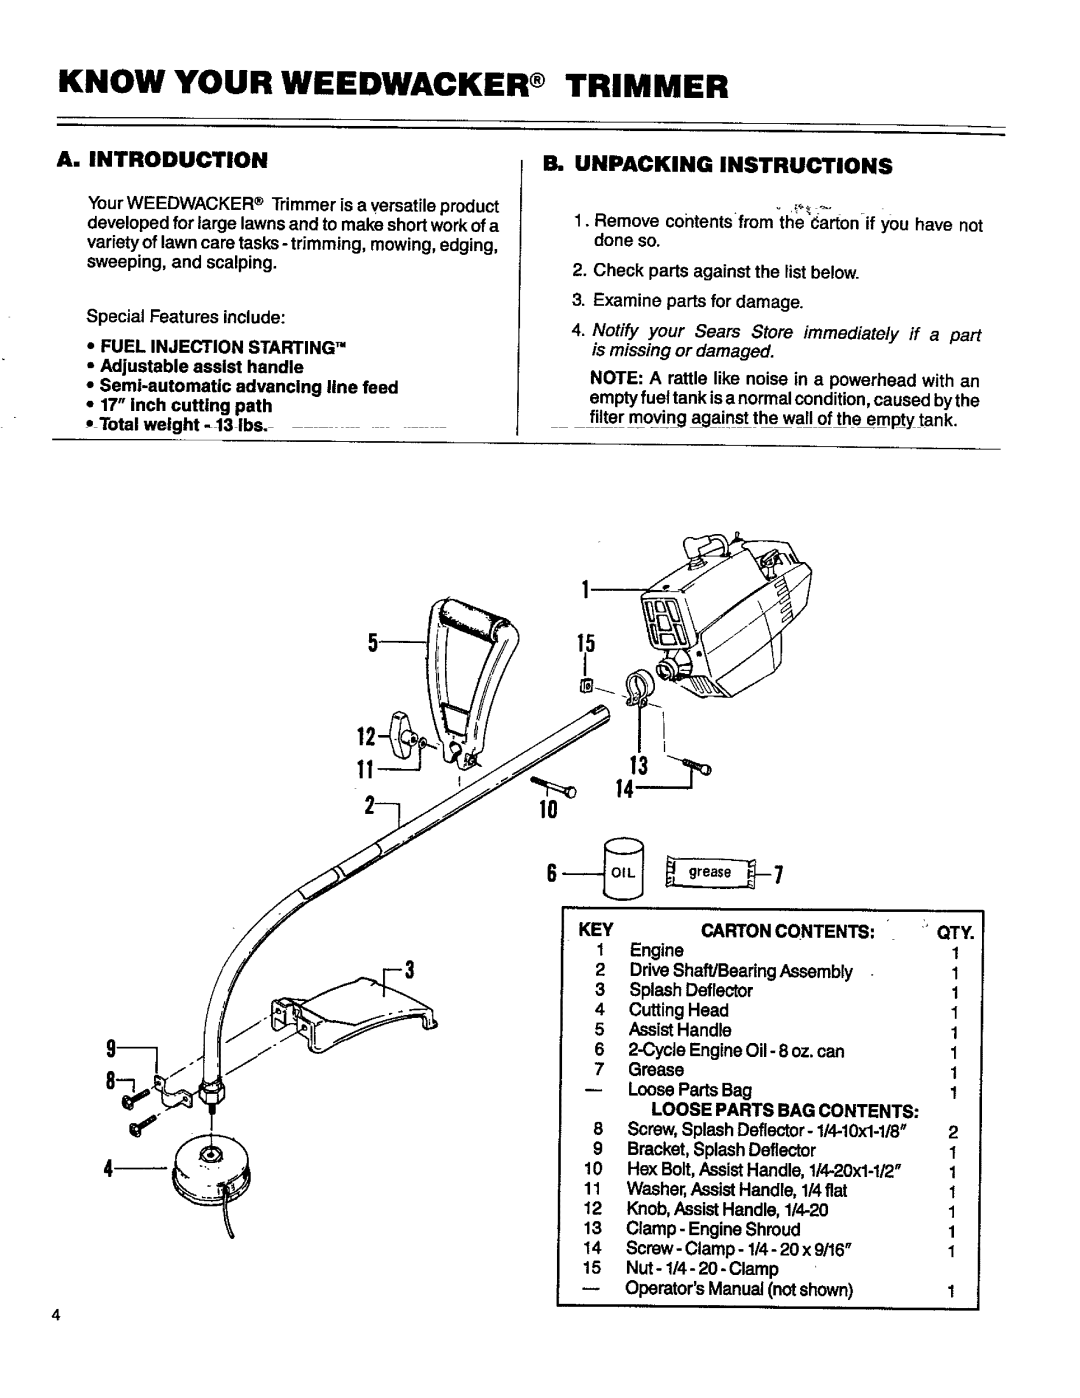 Craftsman 358.796131- 26.2CC Know Your Weedwacker Trimmer, A.Introduction, B. Unpacking Instructions, L m 